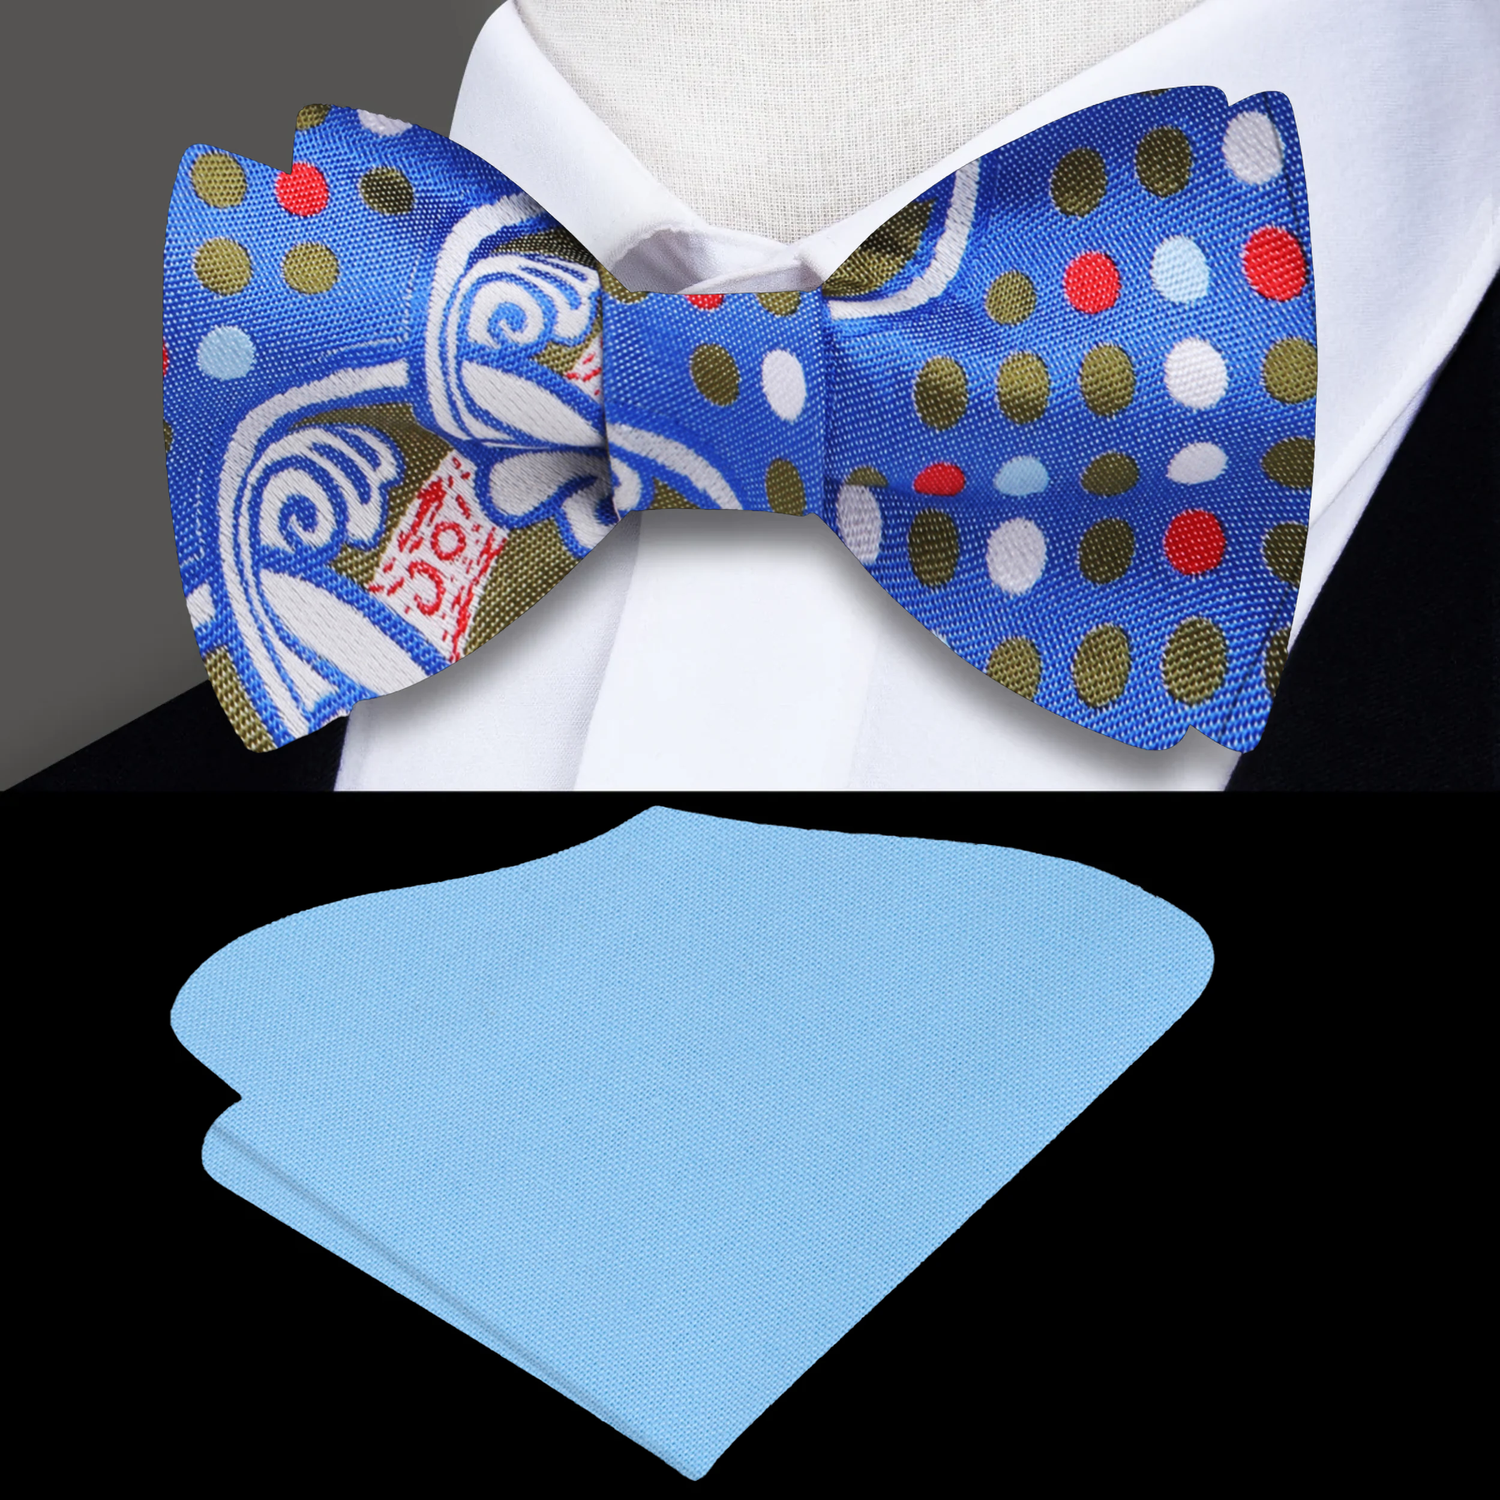 A White, Blue, Red, Green Wavy Circular Abstract with Dots Pattern Silk Self Tie Bow Tie, With Light Blue Pocket Square